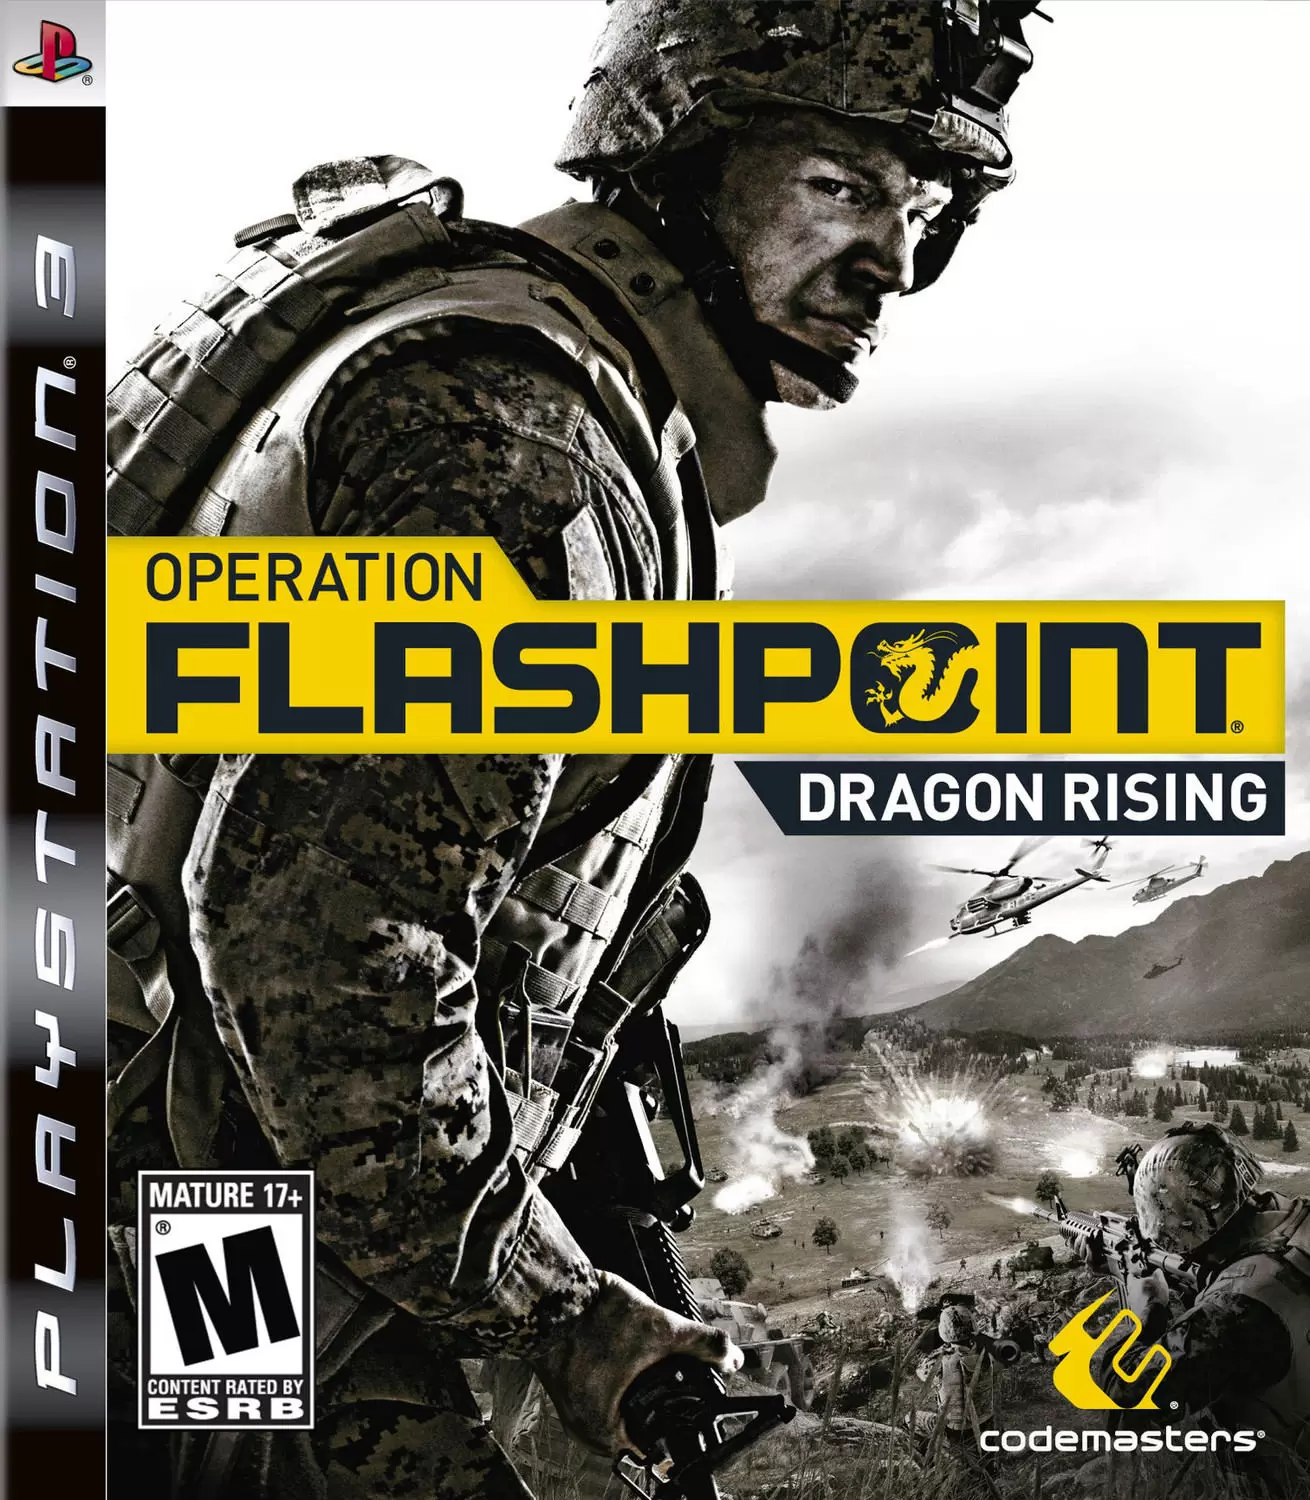 PS3 Games - Operation Flashpoint: Dragon Rising